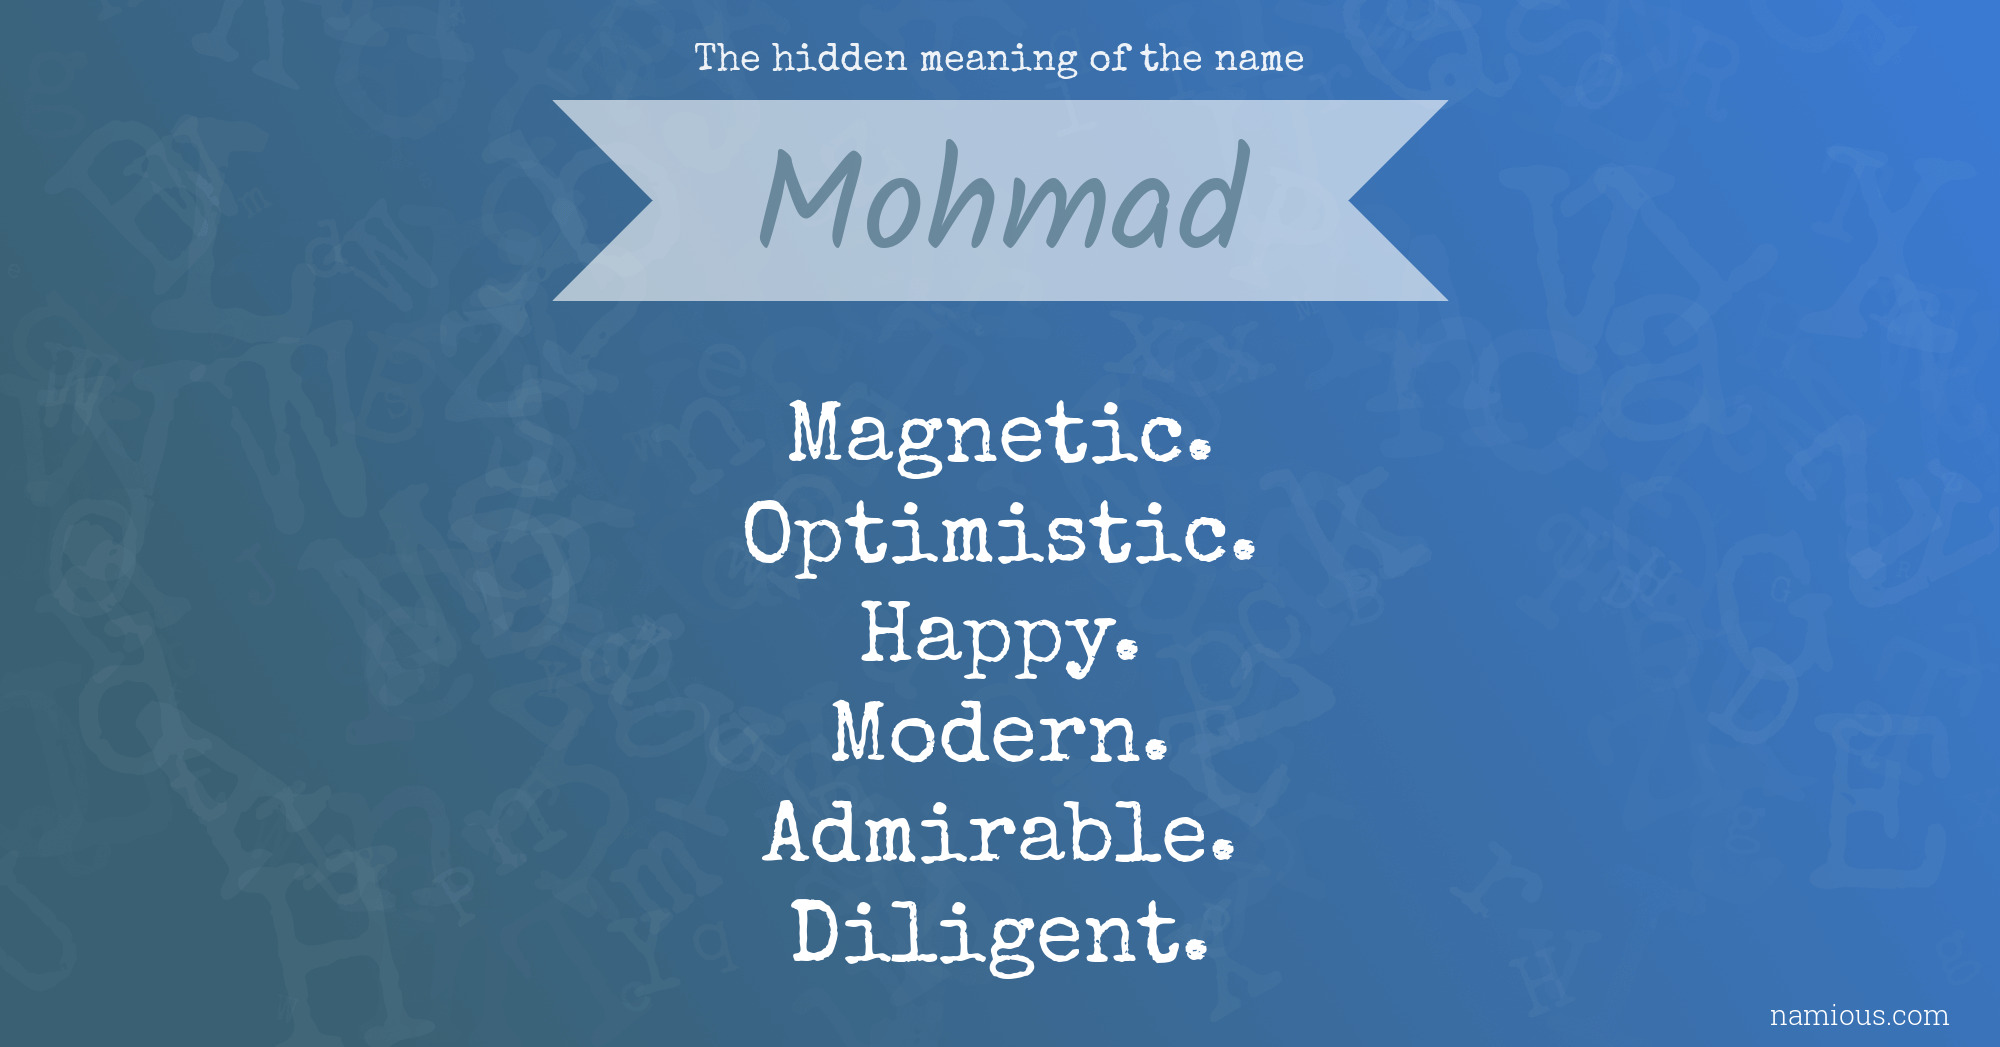 The hidden meaning of the name Mohmad